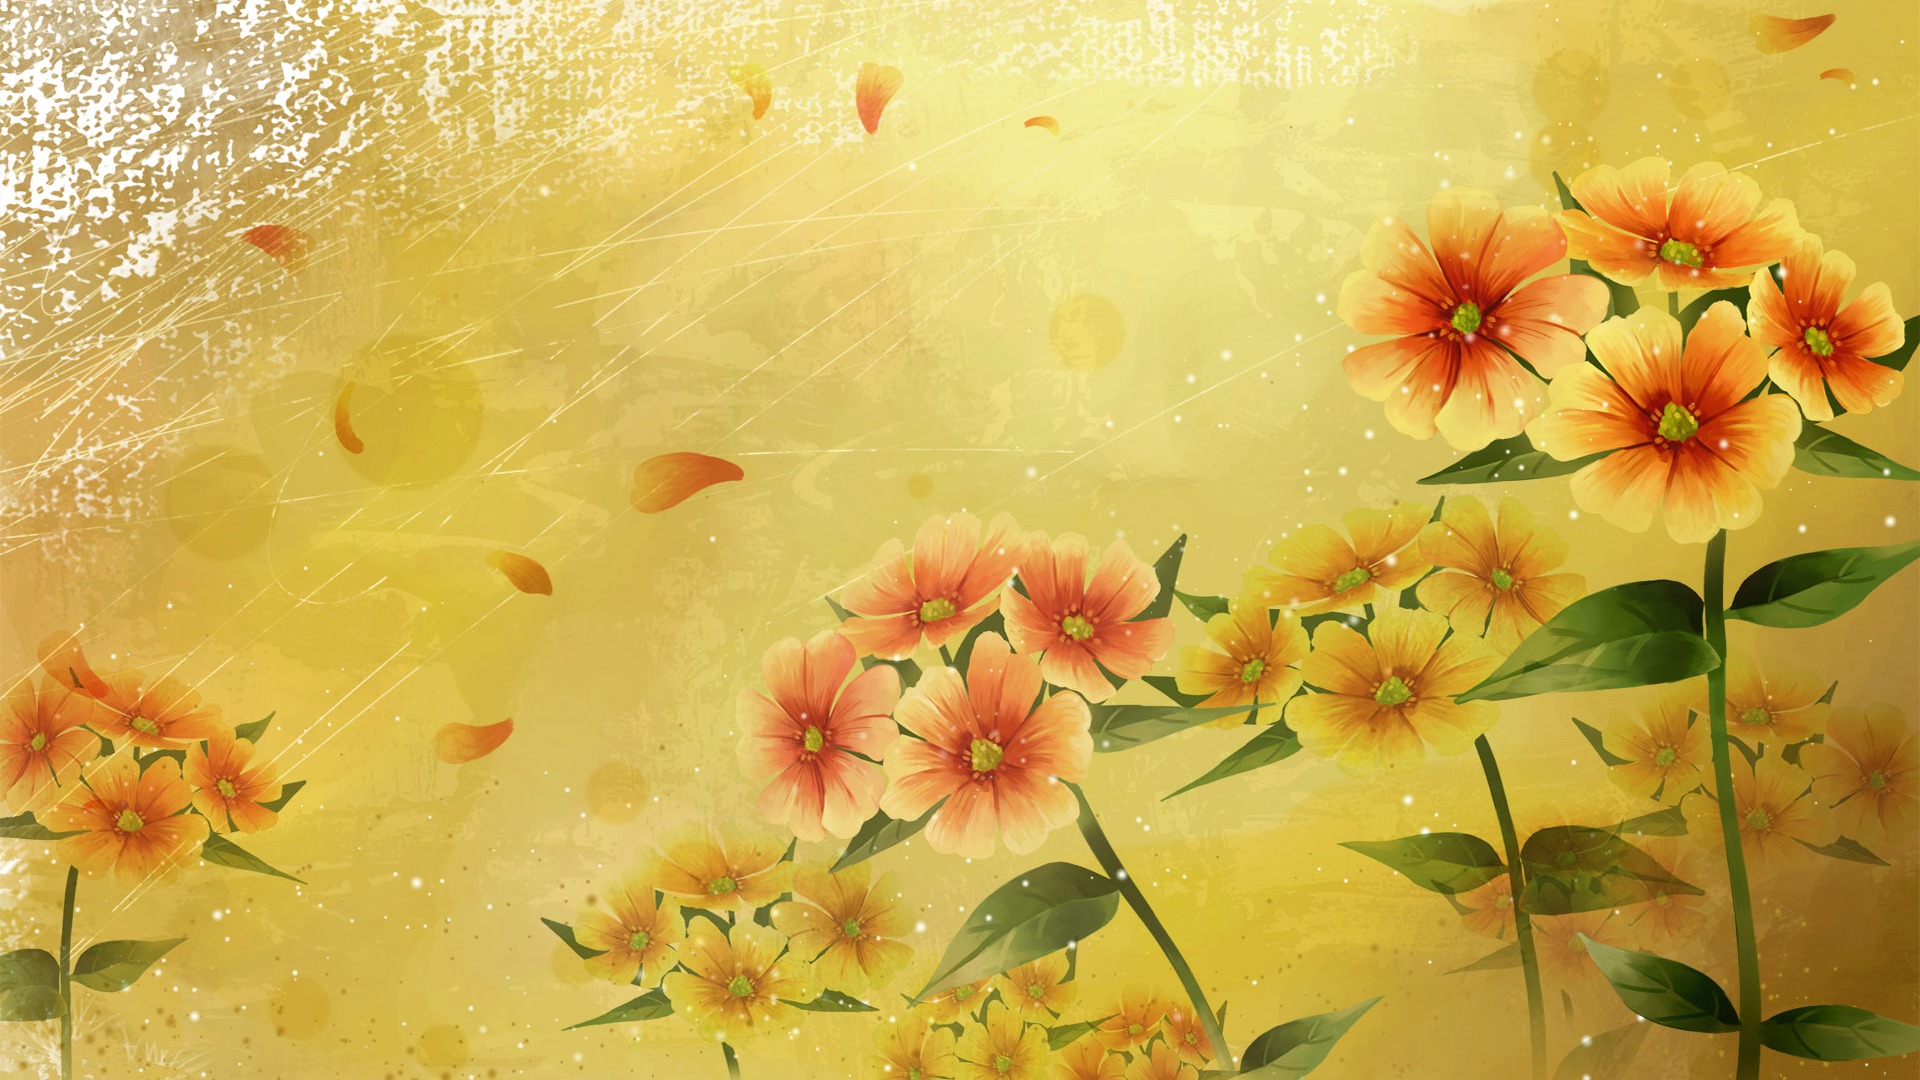 Synthetic Wallpaper Colorful Flower #33 - 1920x1080